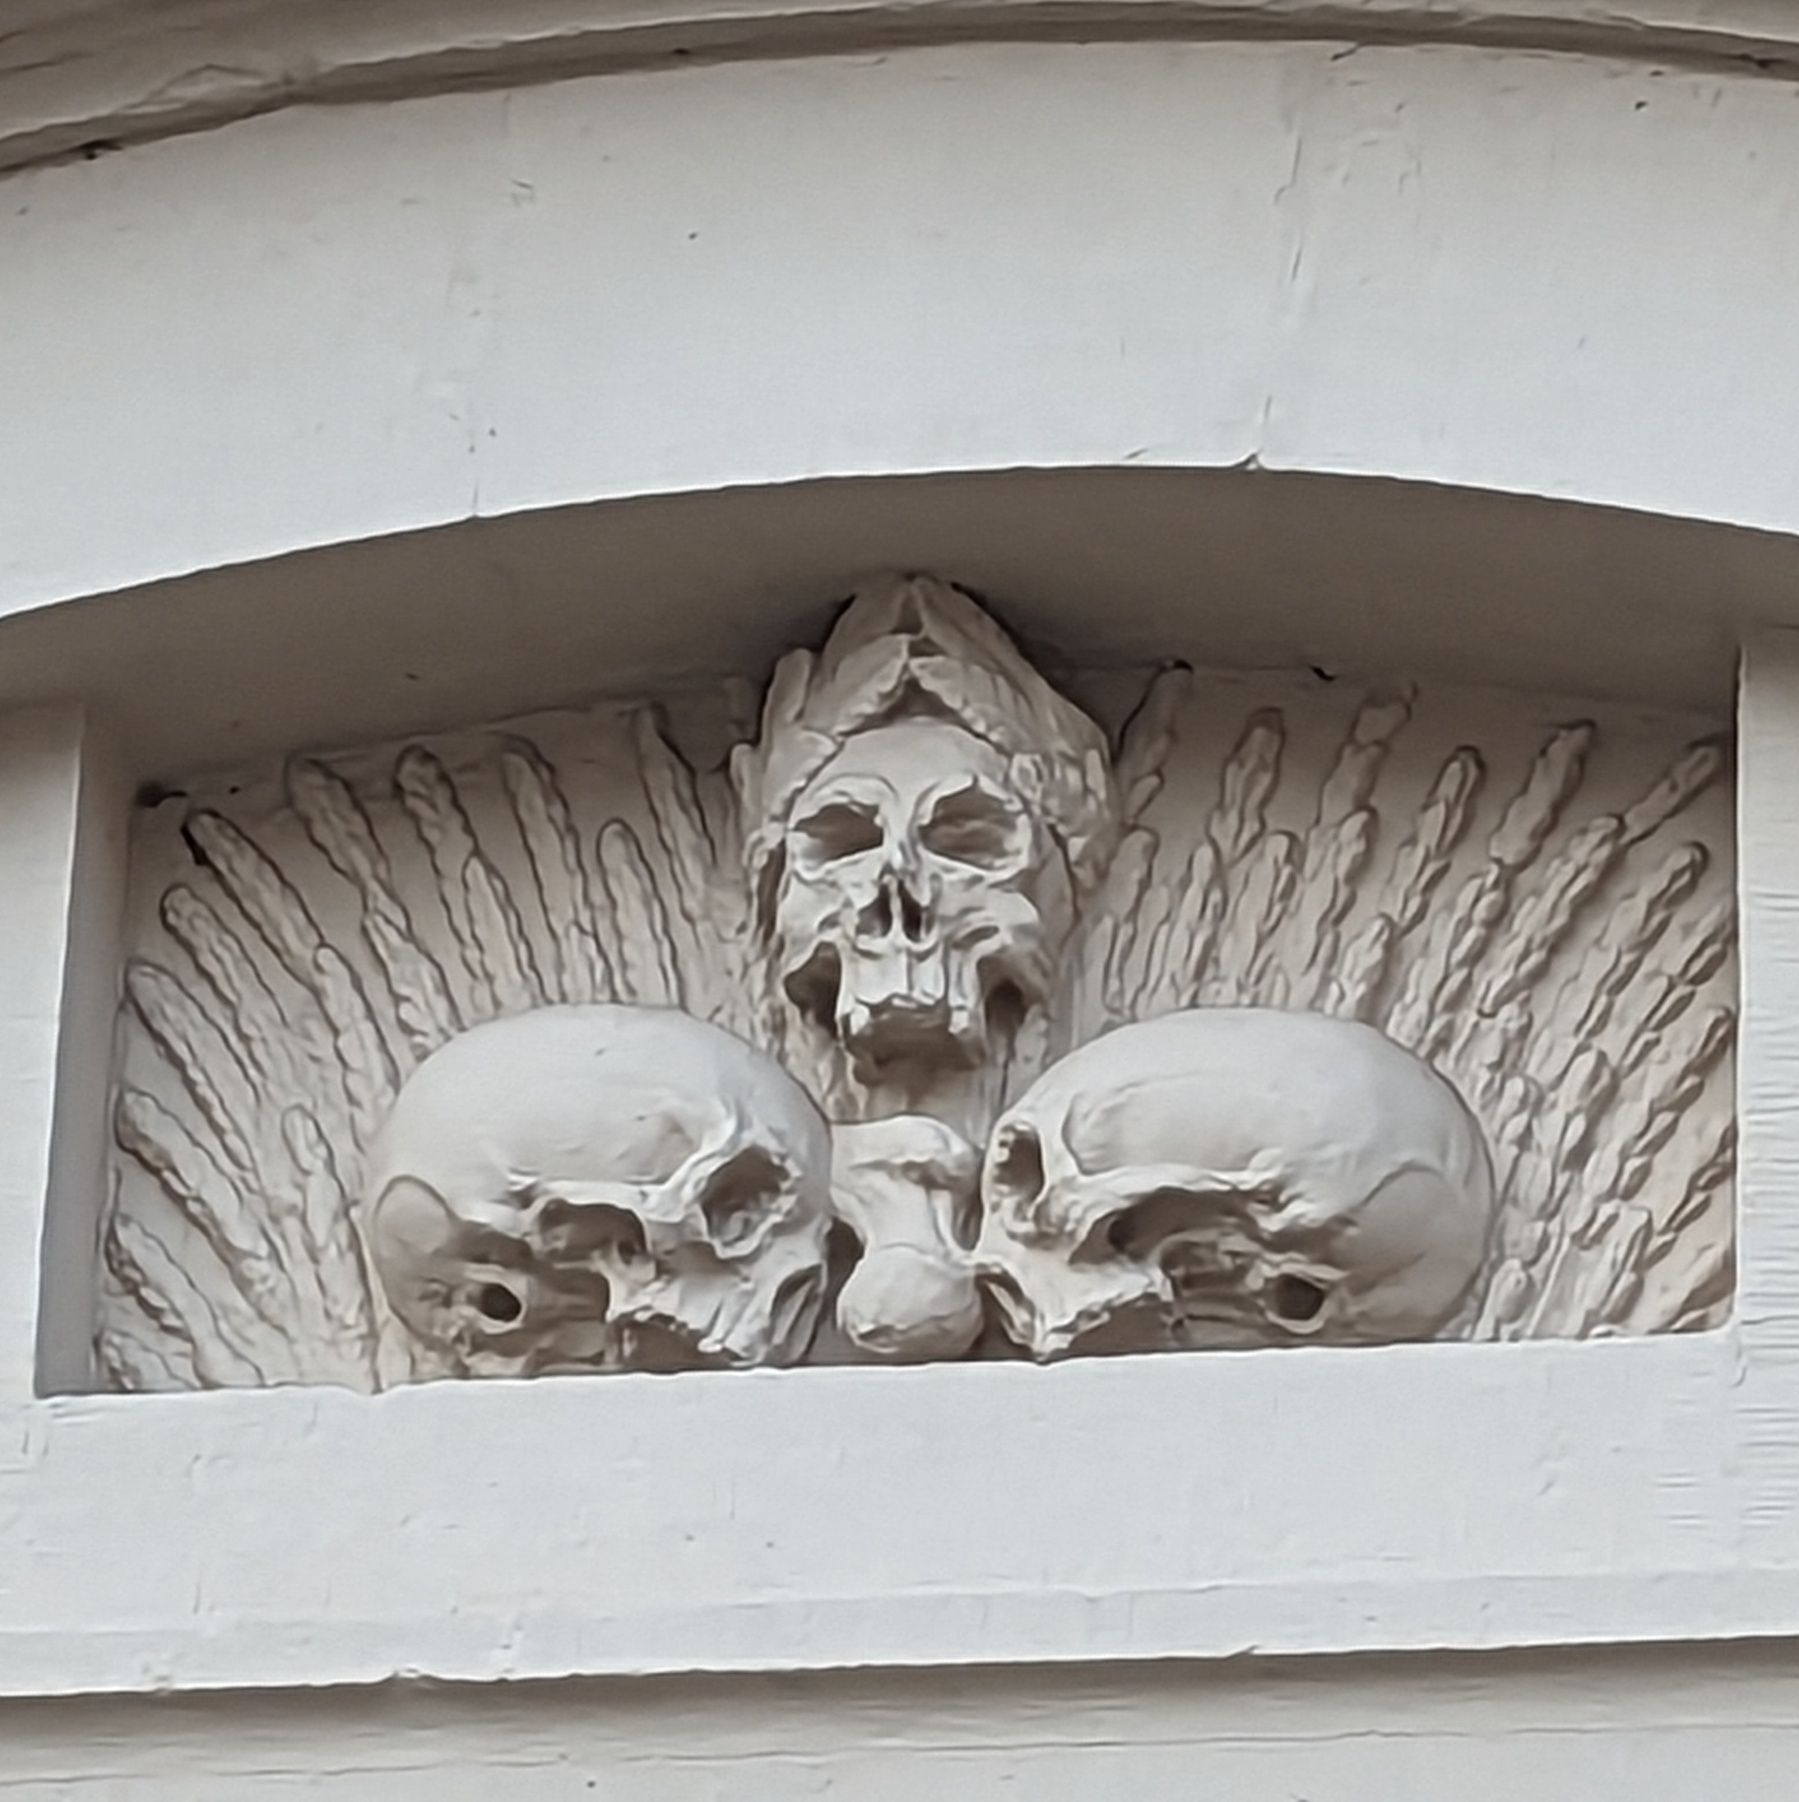 A stone relief. A skull wearing a leaf crown floats over two other skulls. The crowned skull faces forward. The other two skulls are in profile.